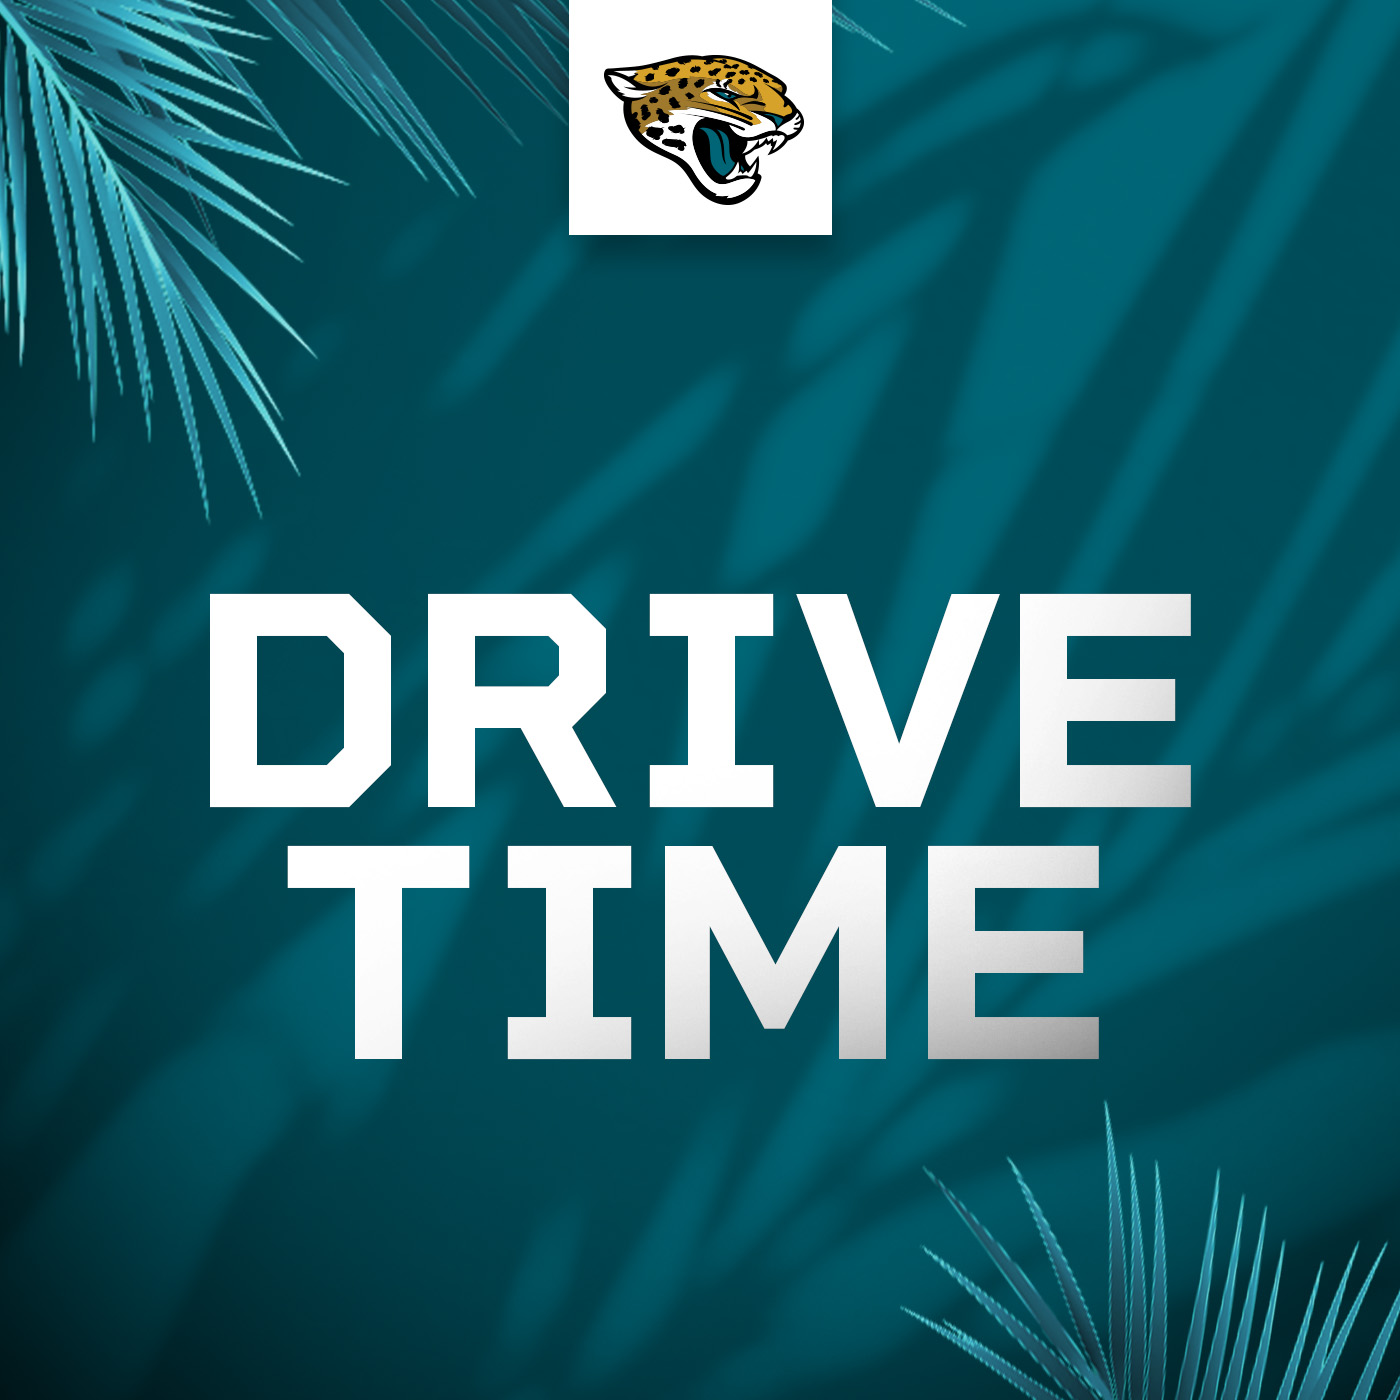 Looking ahead to Chiefs, MJD joins the show | Jags Drive Time: Wednesday, January 18